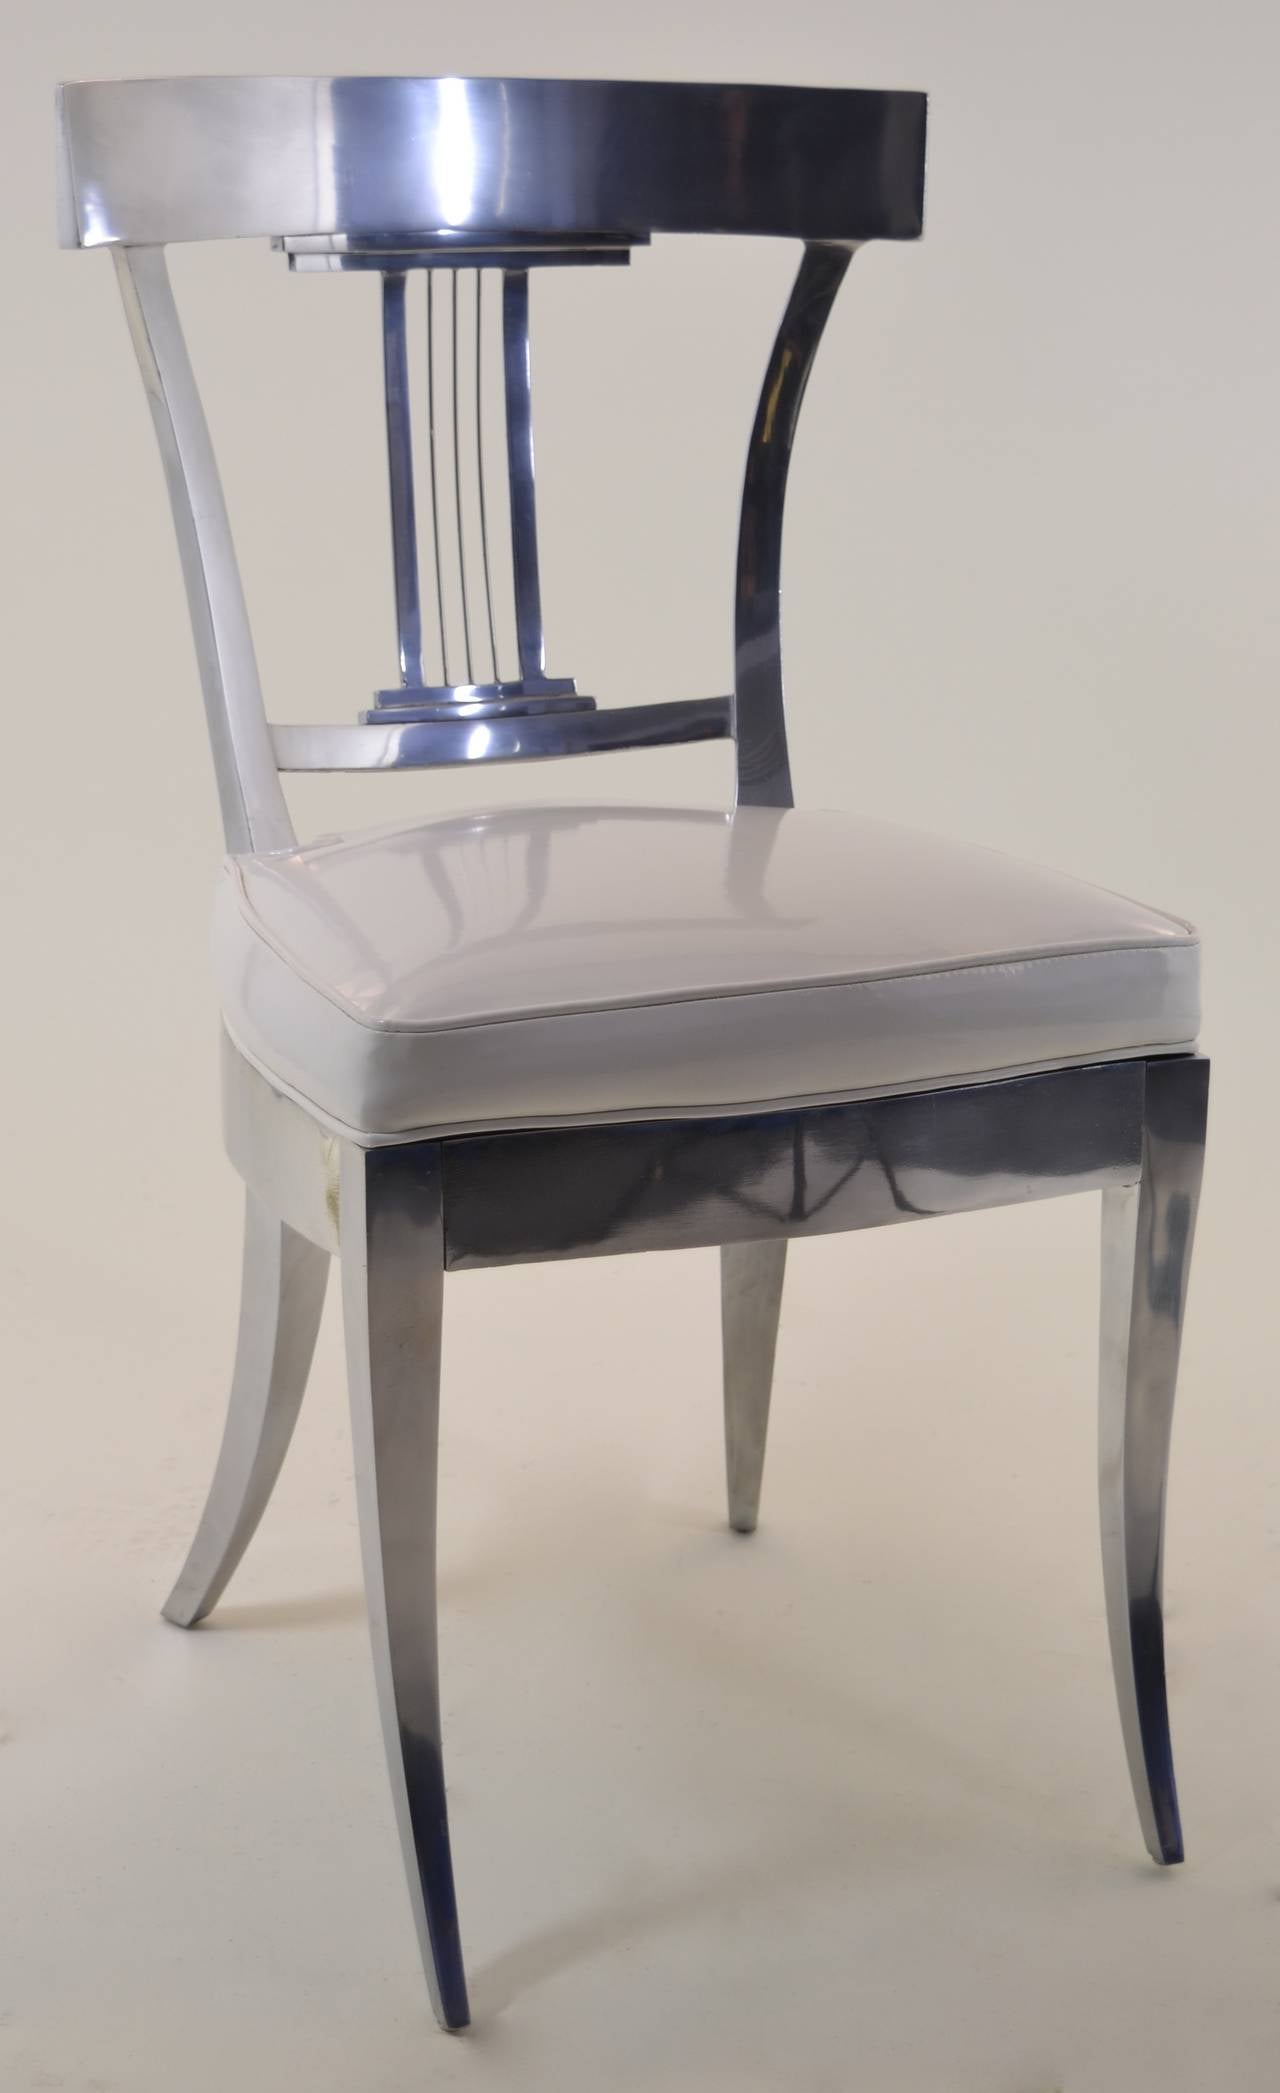 Quality cast aluminum side chair in polished aluminum with fitted boxed seat, newly upholstered in patent 